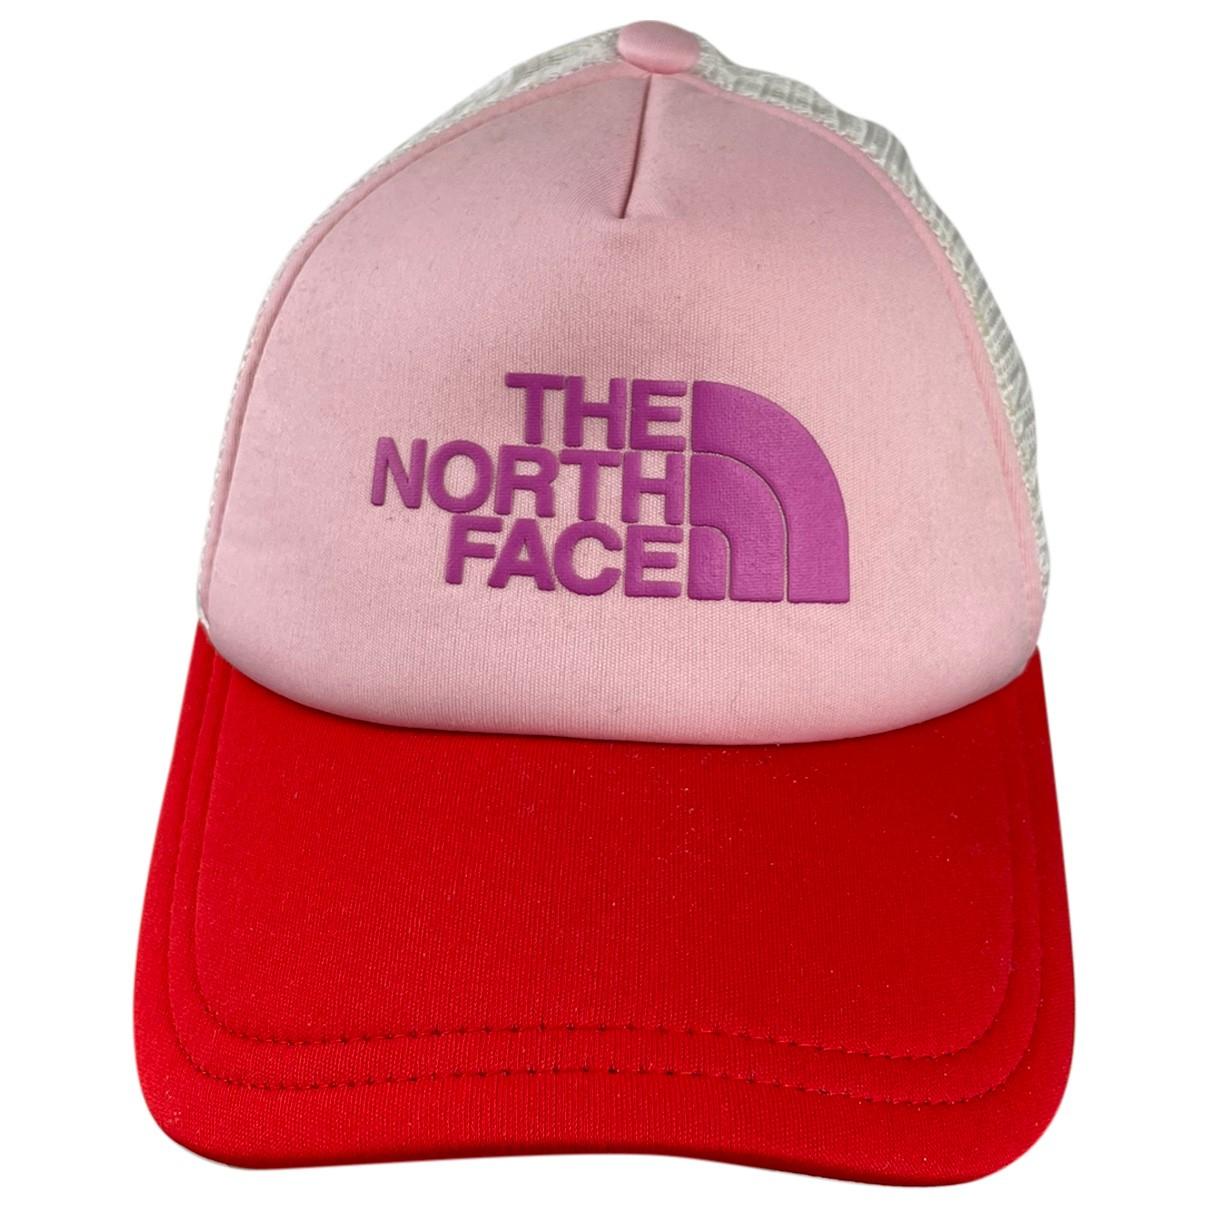 Casquette The North Face Rose taille 55 cm en Polyester - 30358916